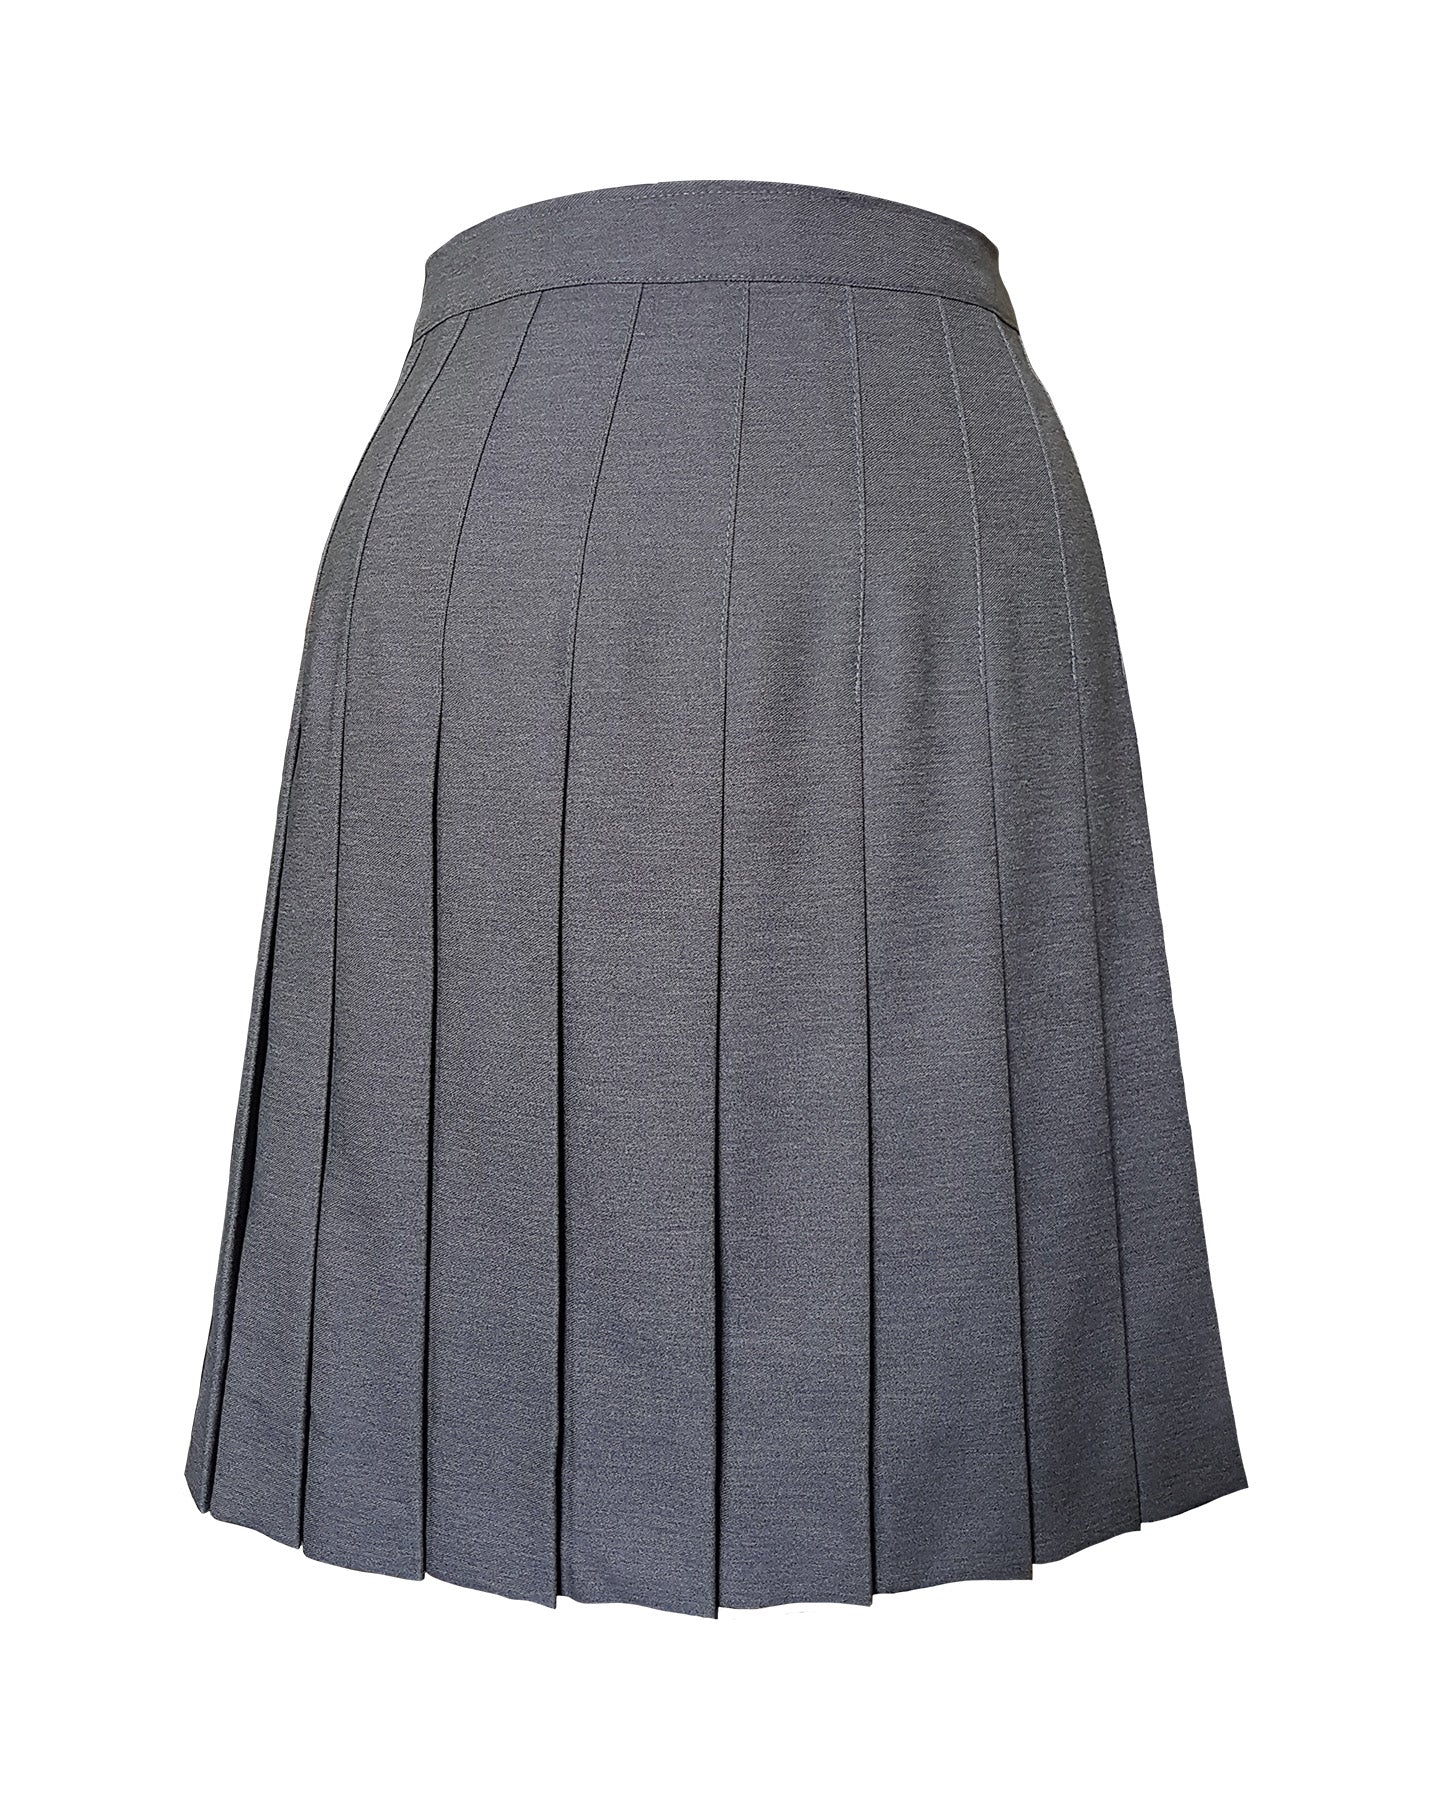 GREY CLASSIC WIDE FULL PLEAT SKIRT, REGULAR BACK, SIZE 30 AND UP ...